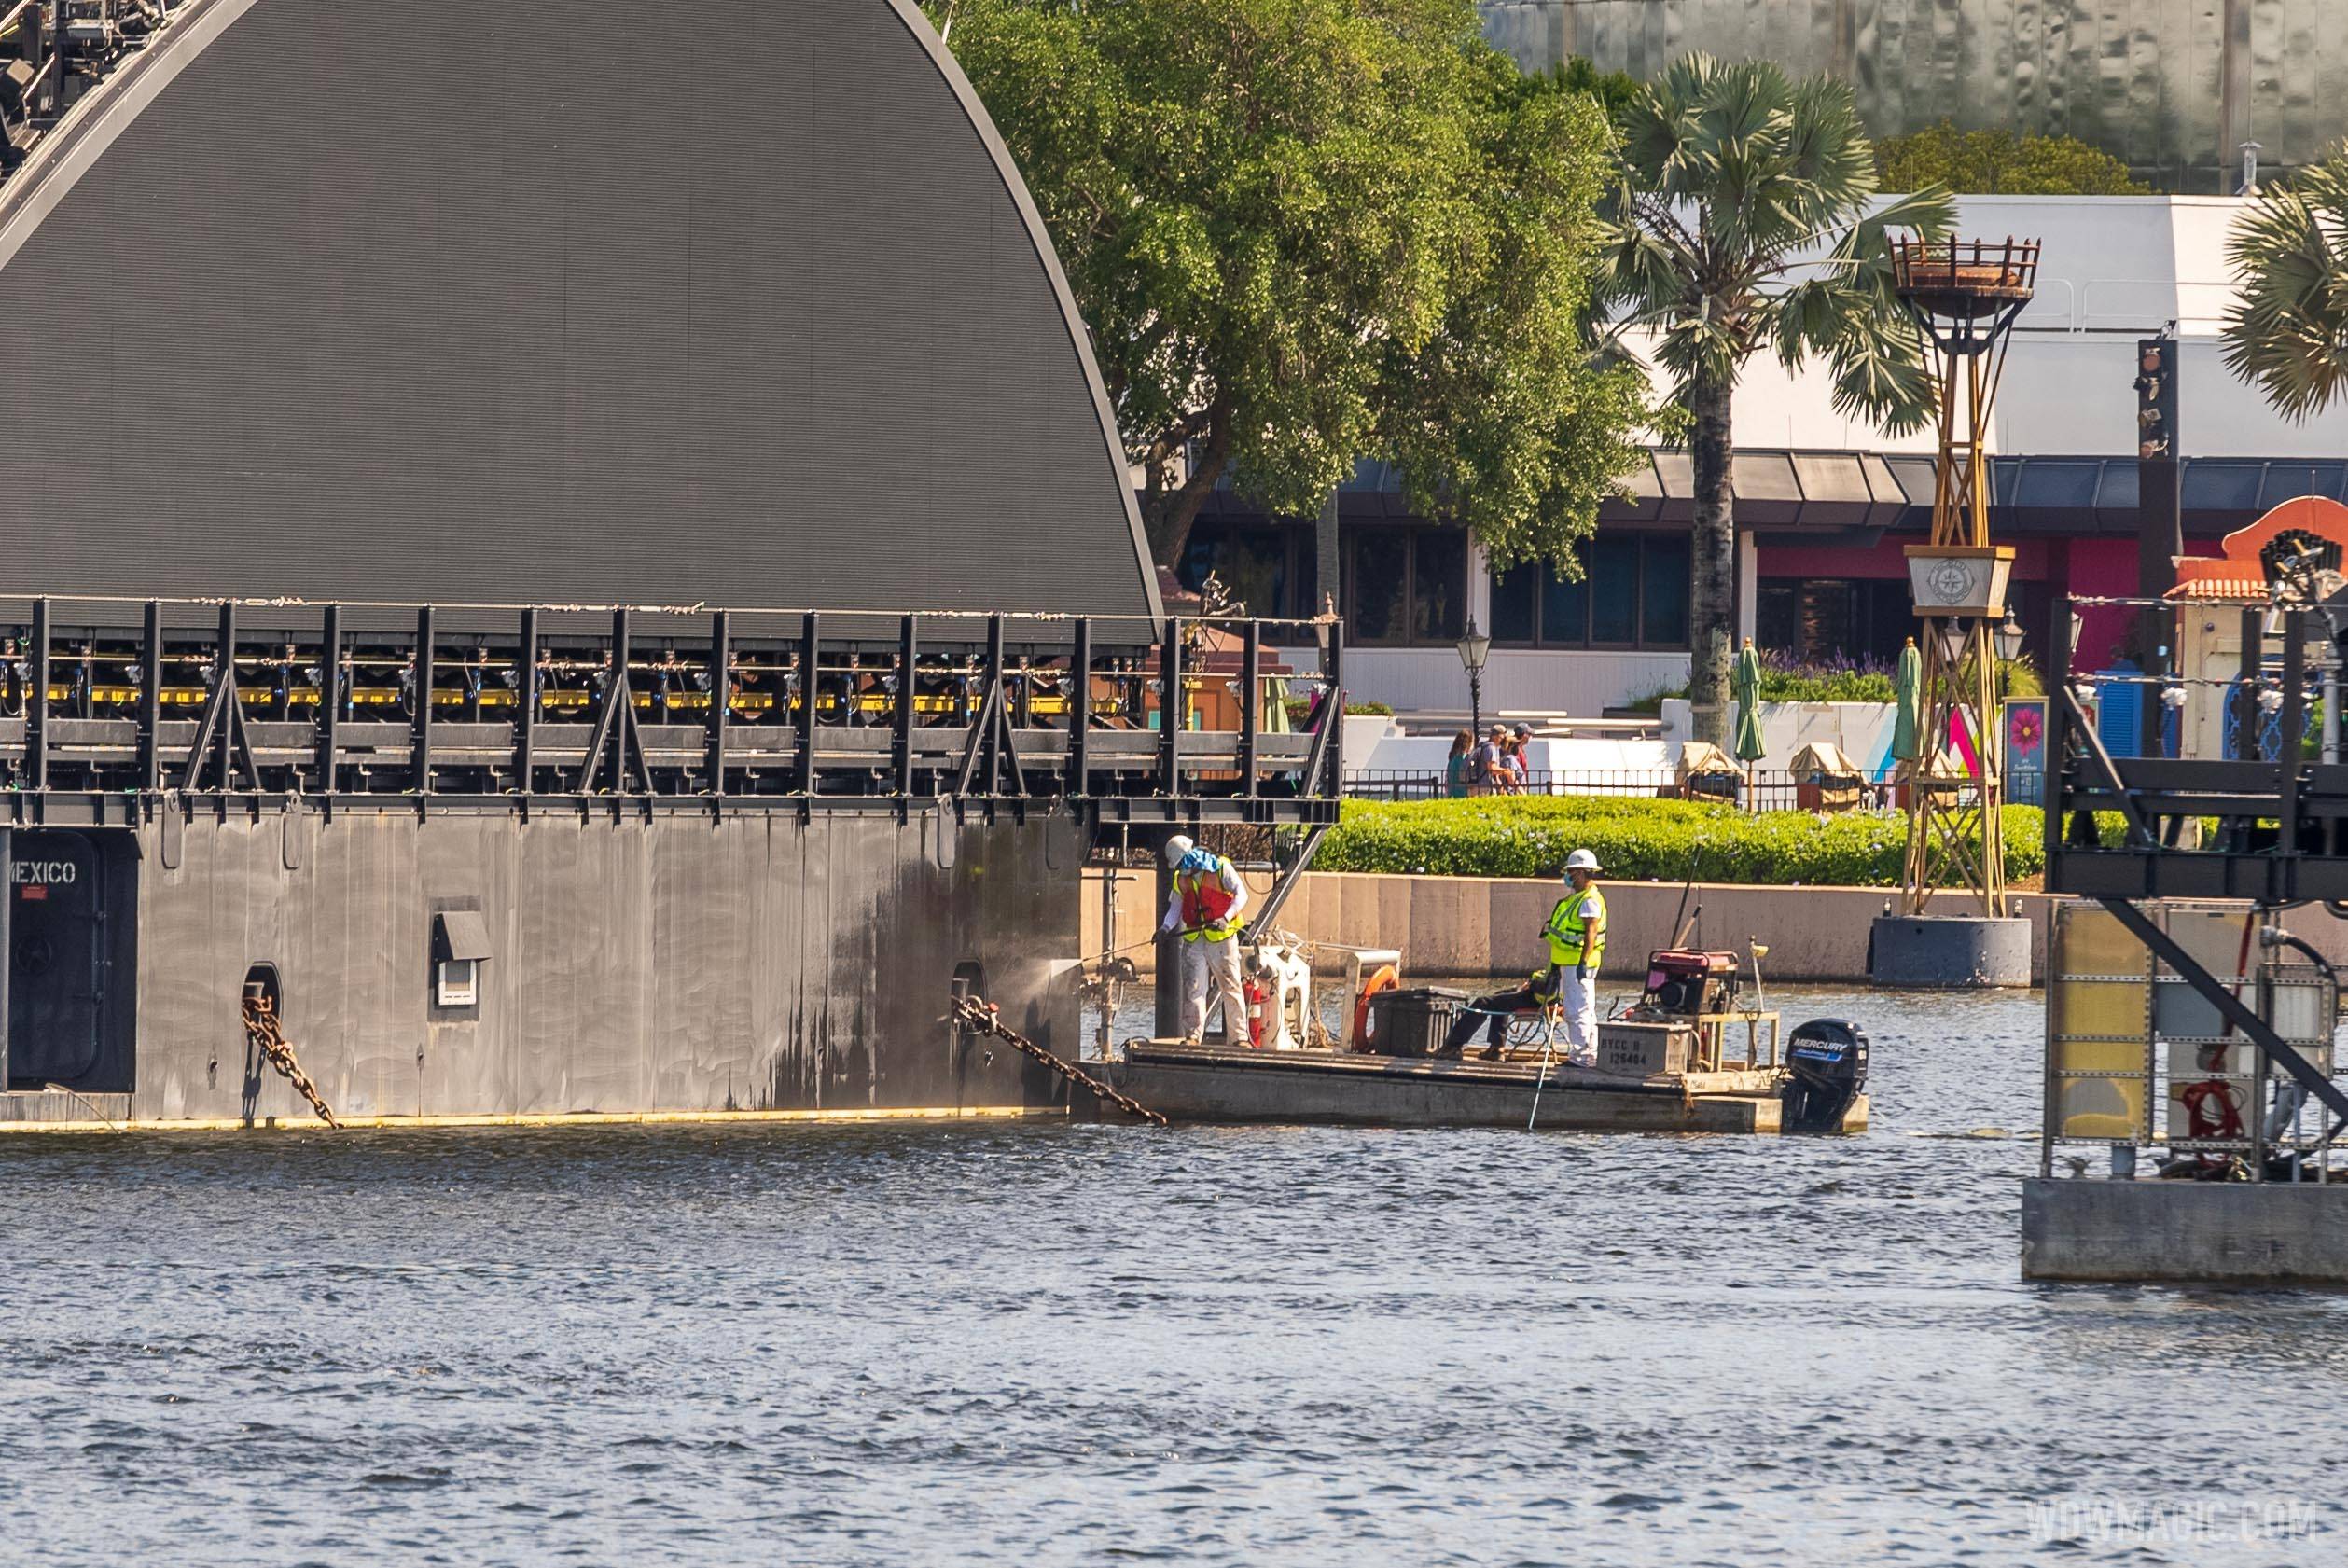 Pressure washing and painting underway on the first of EPCOT Harmonious show platform barges